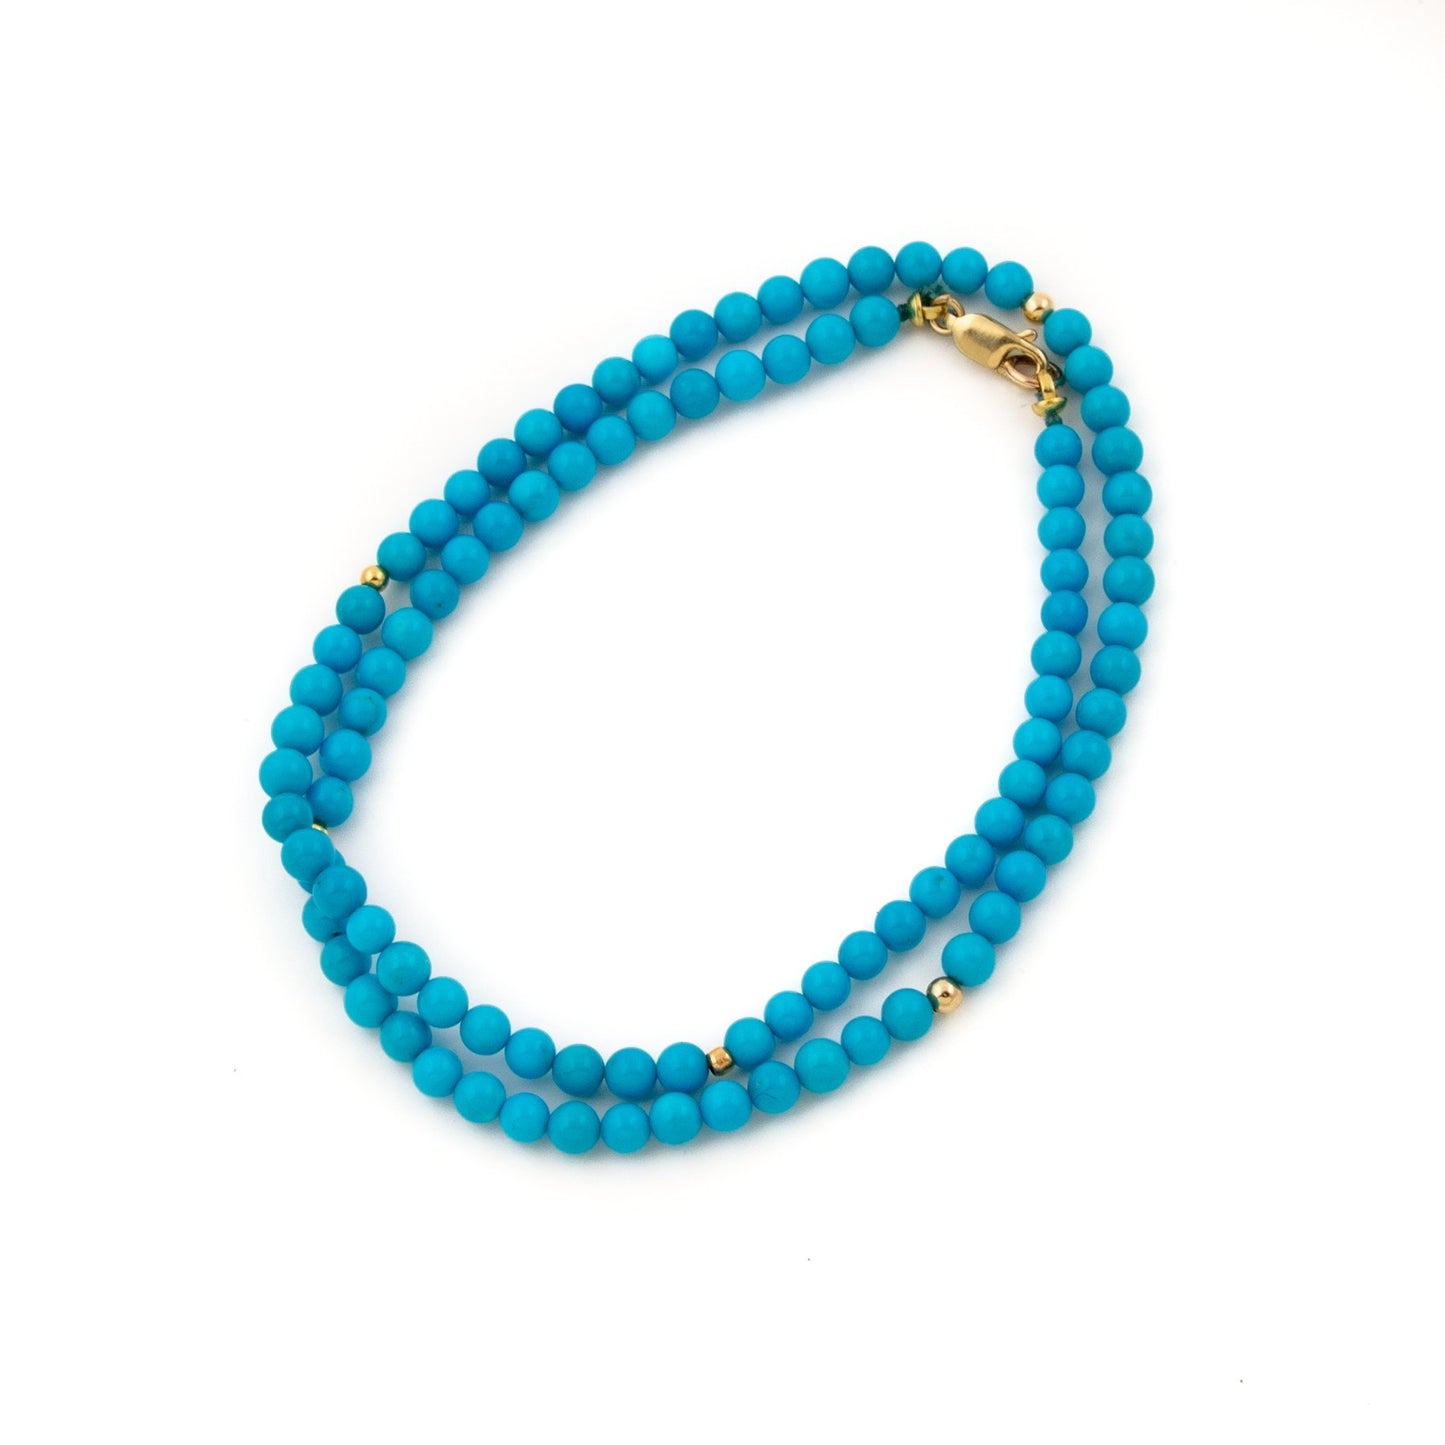 4mm Sleeping Beauty Turquoise and Gold Beads - Kingdom Jewelry